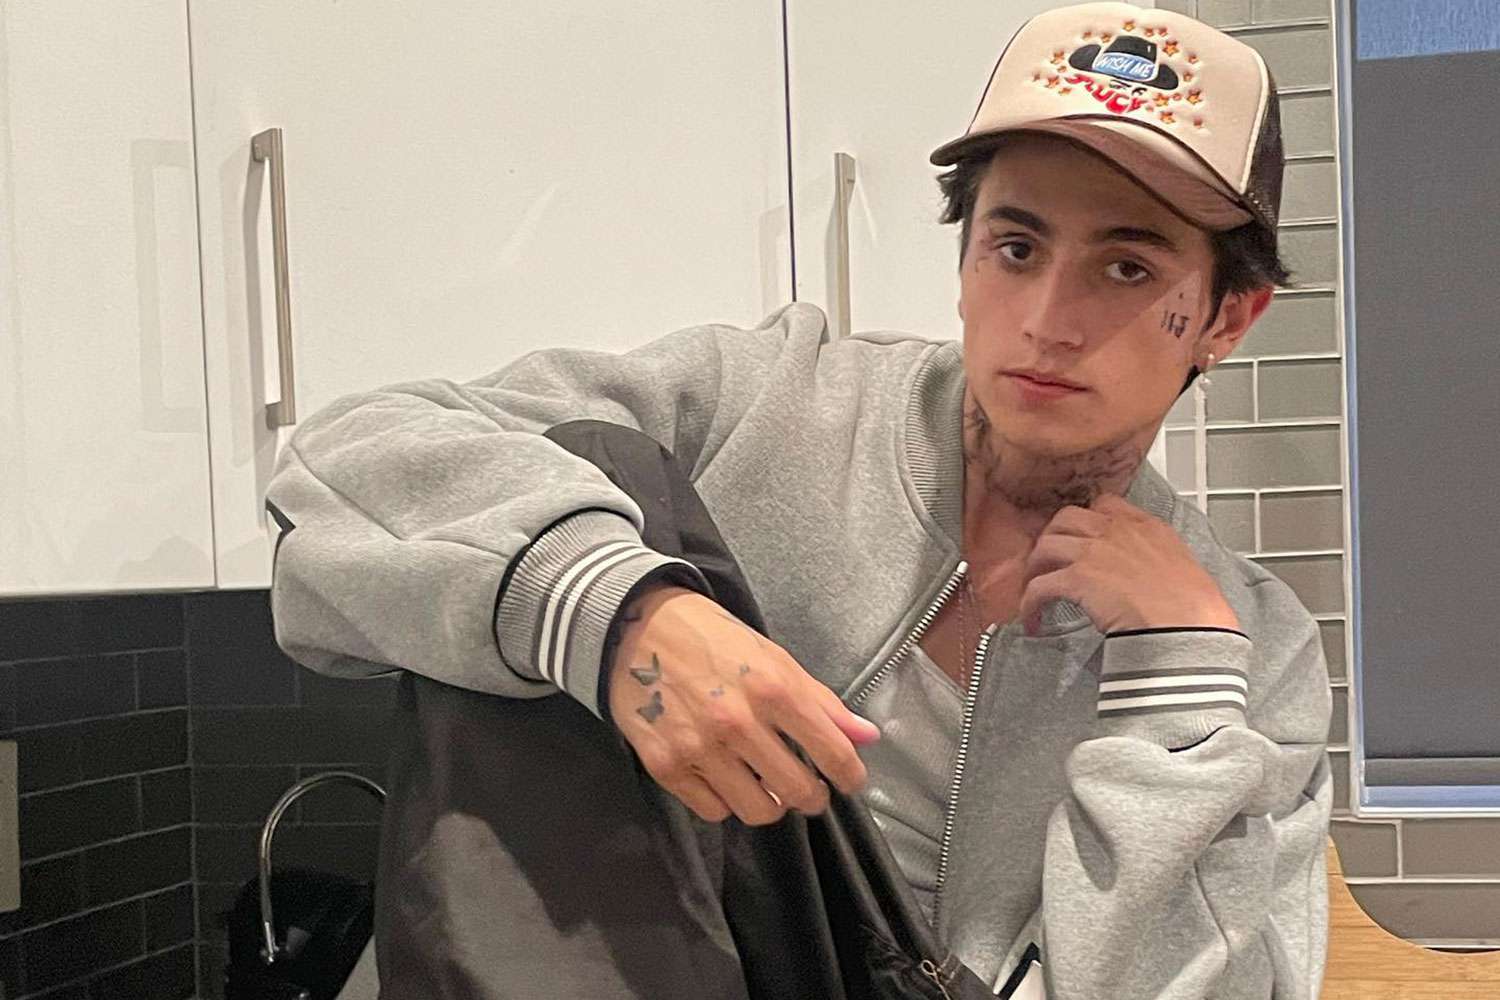 New Arrests Made In Connection To TikTok Star Cooper Noriega’s Fatal Overdose